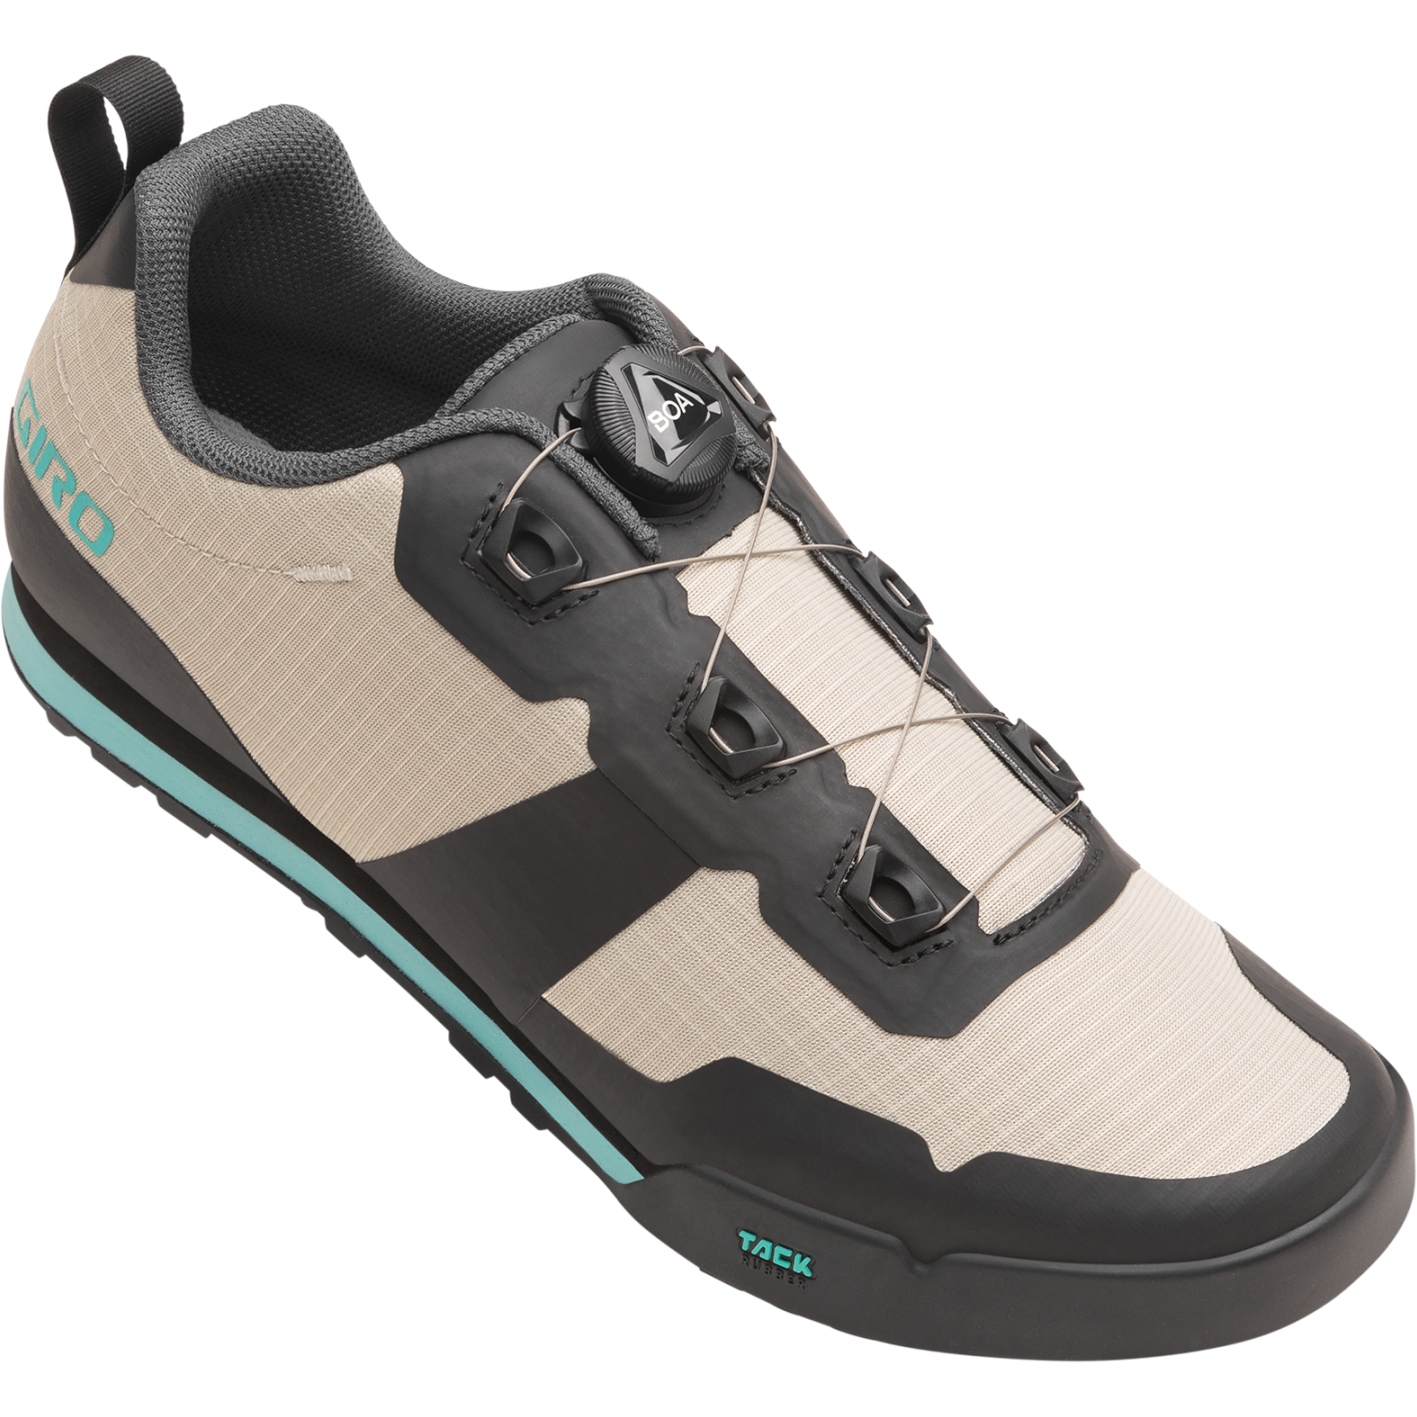 Picture of Giro Tracker Shoes Women - sandstone/screaming teal